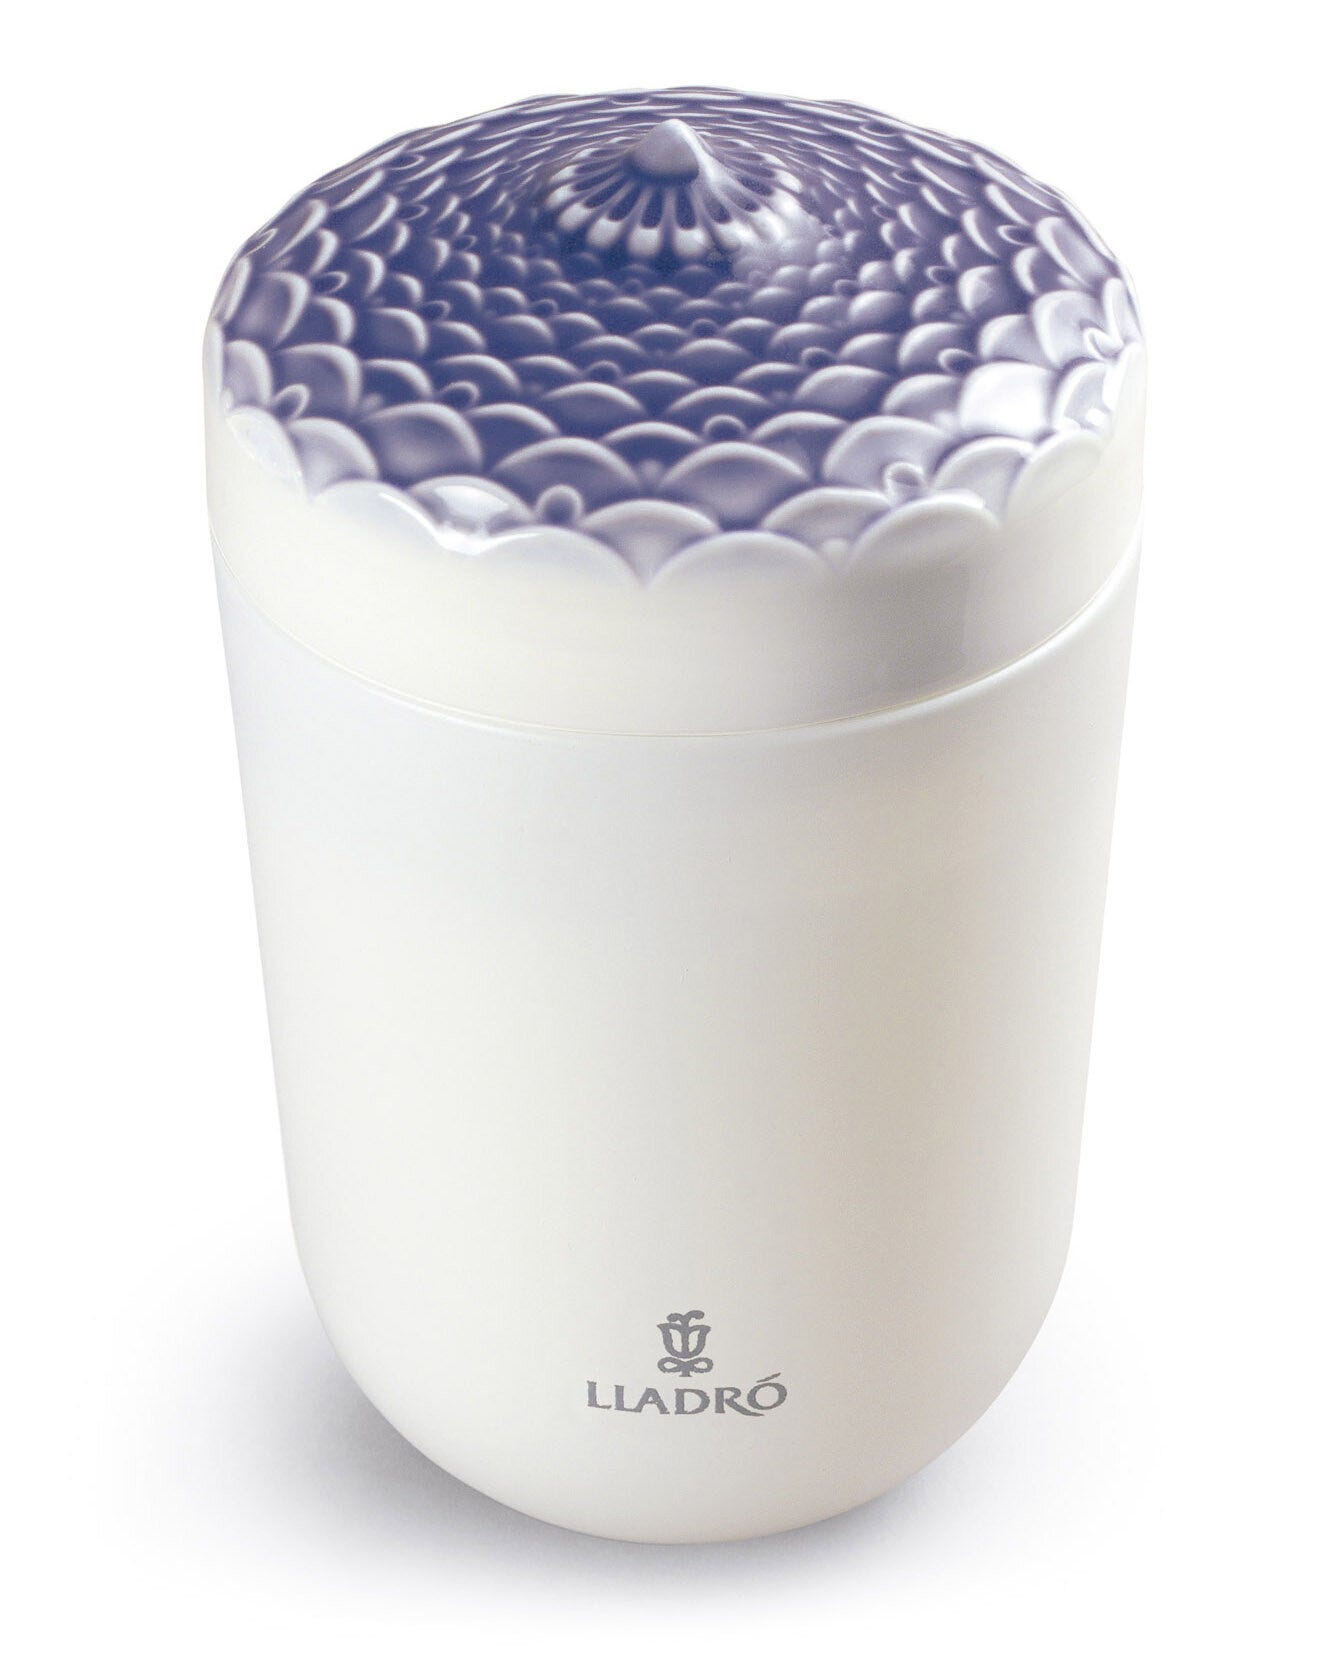 Echoes of Nature Candle. A Secret Orient Scent - Lladro-USA